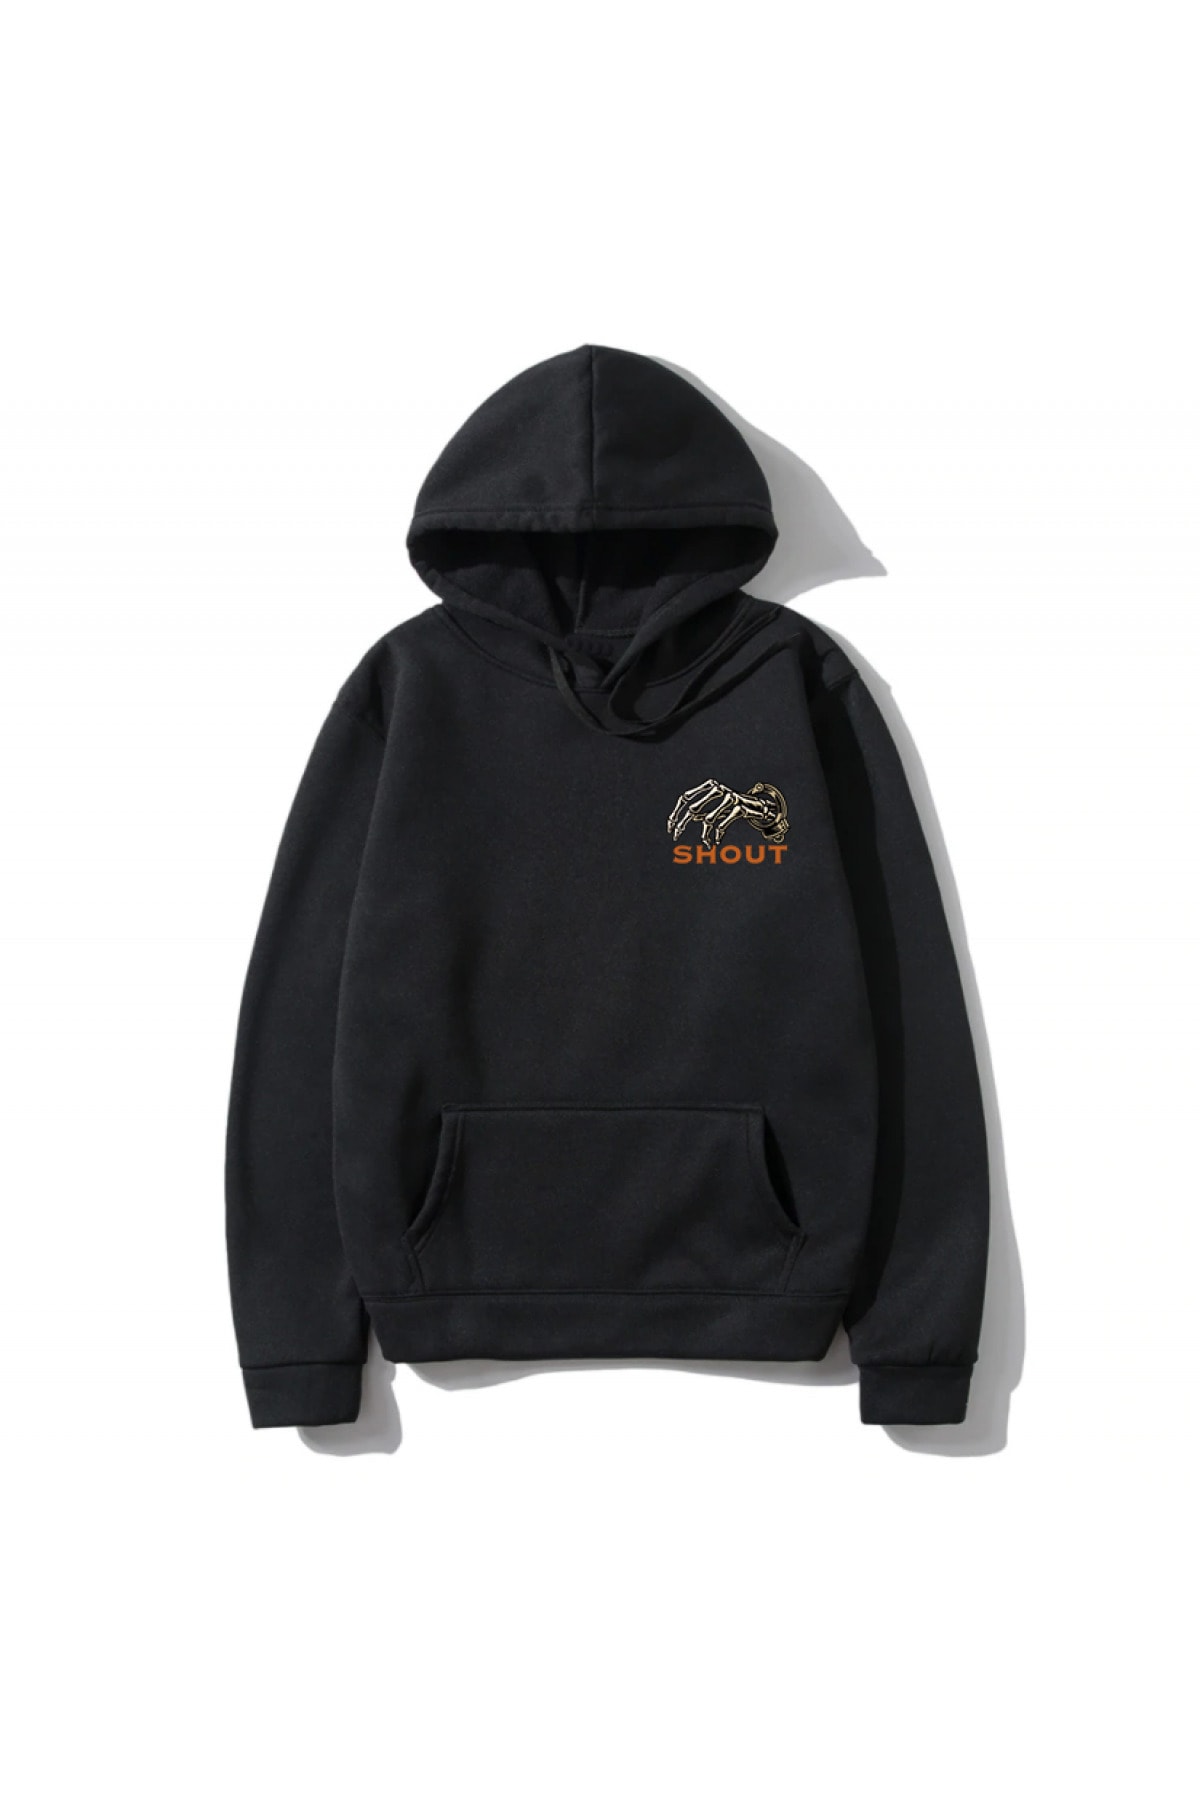 Shout Oversize Deal With A Demon Unisex Hoodie